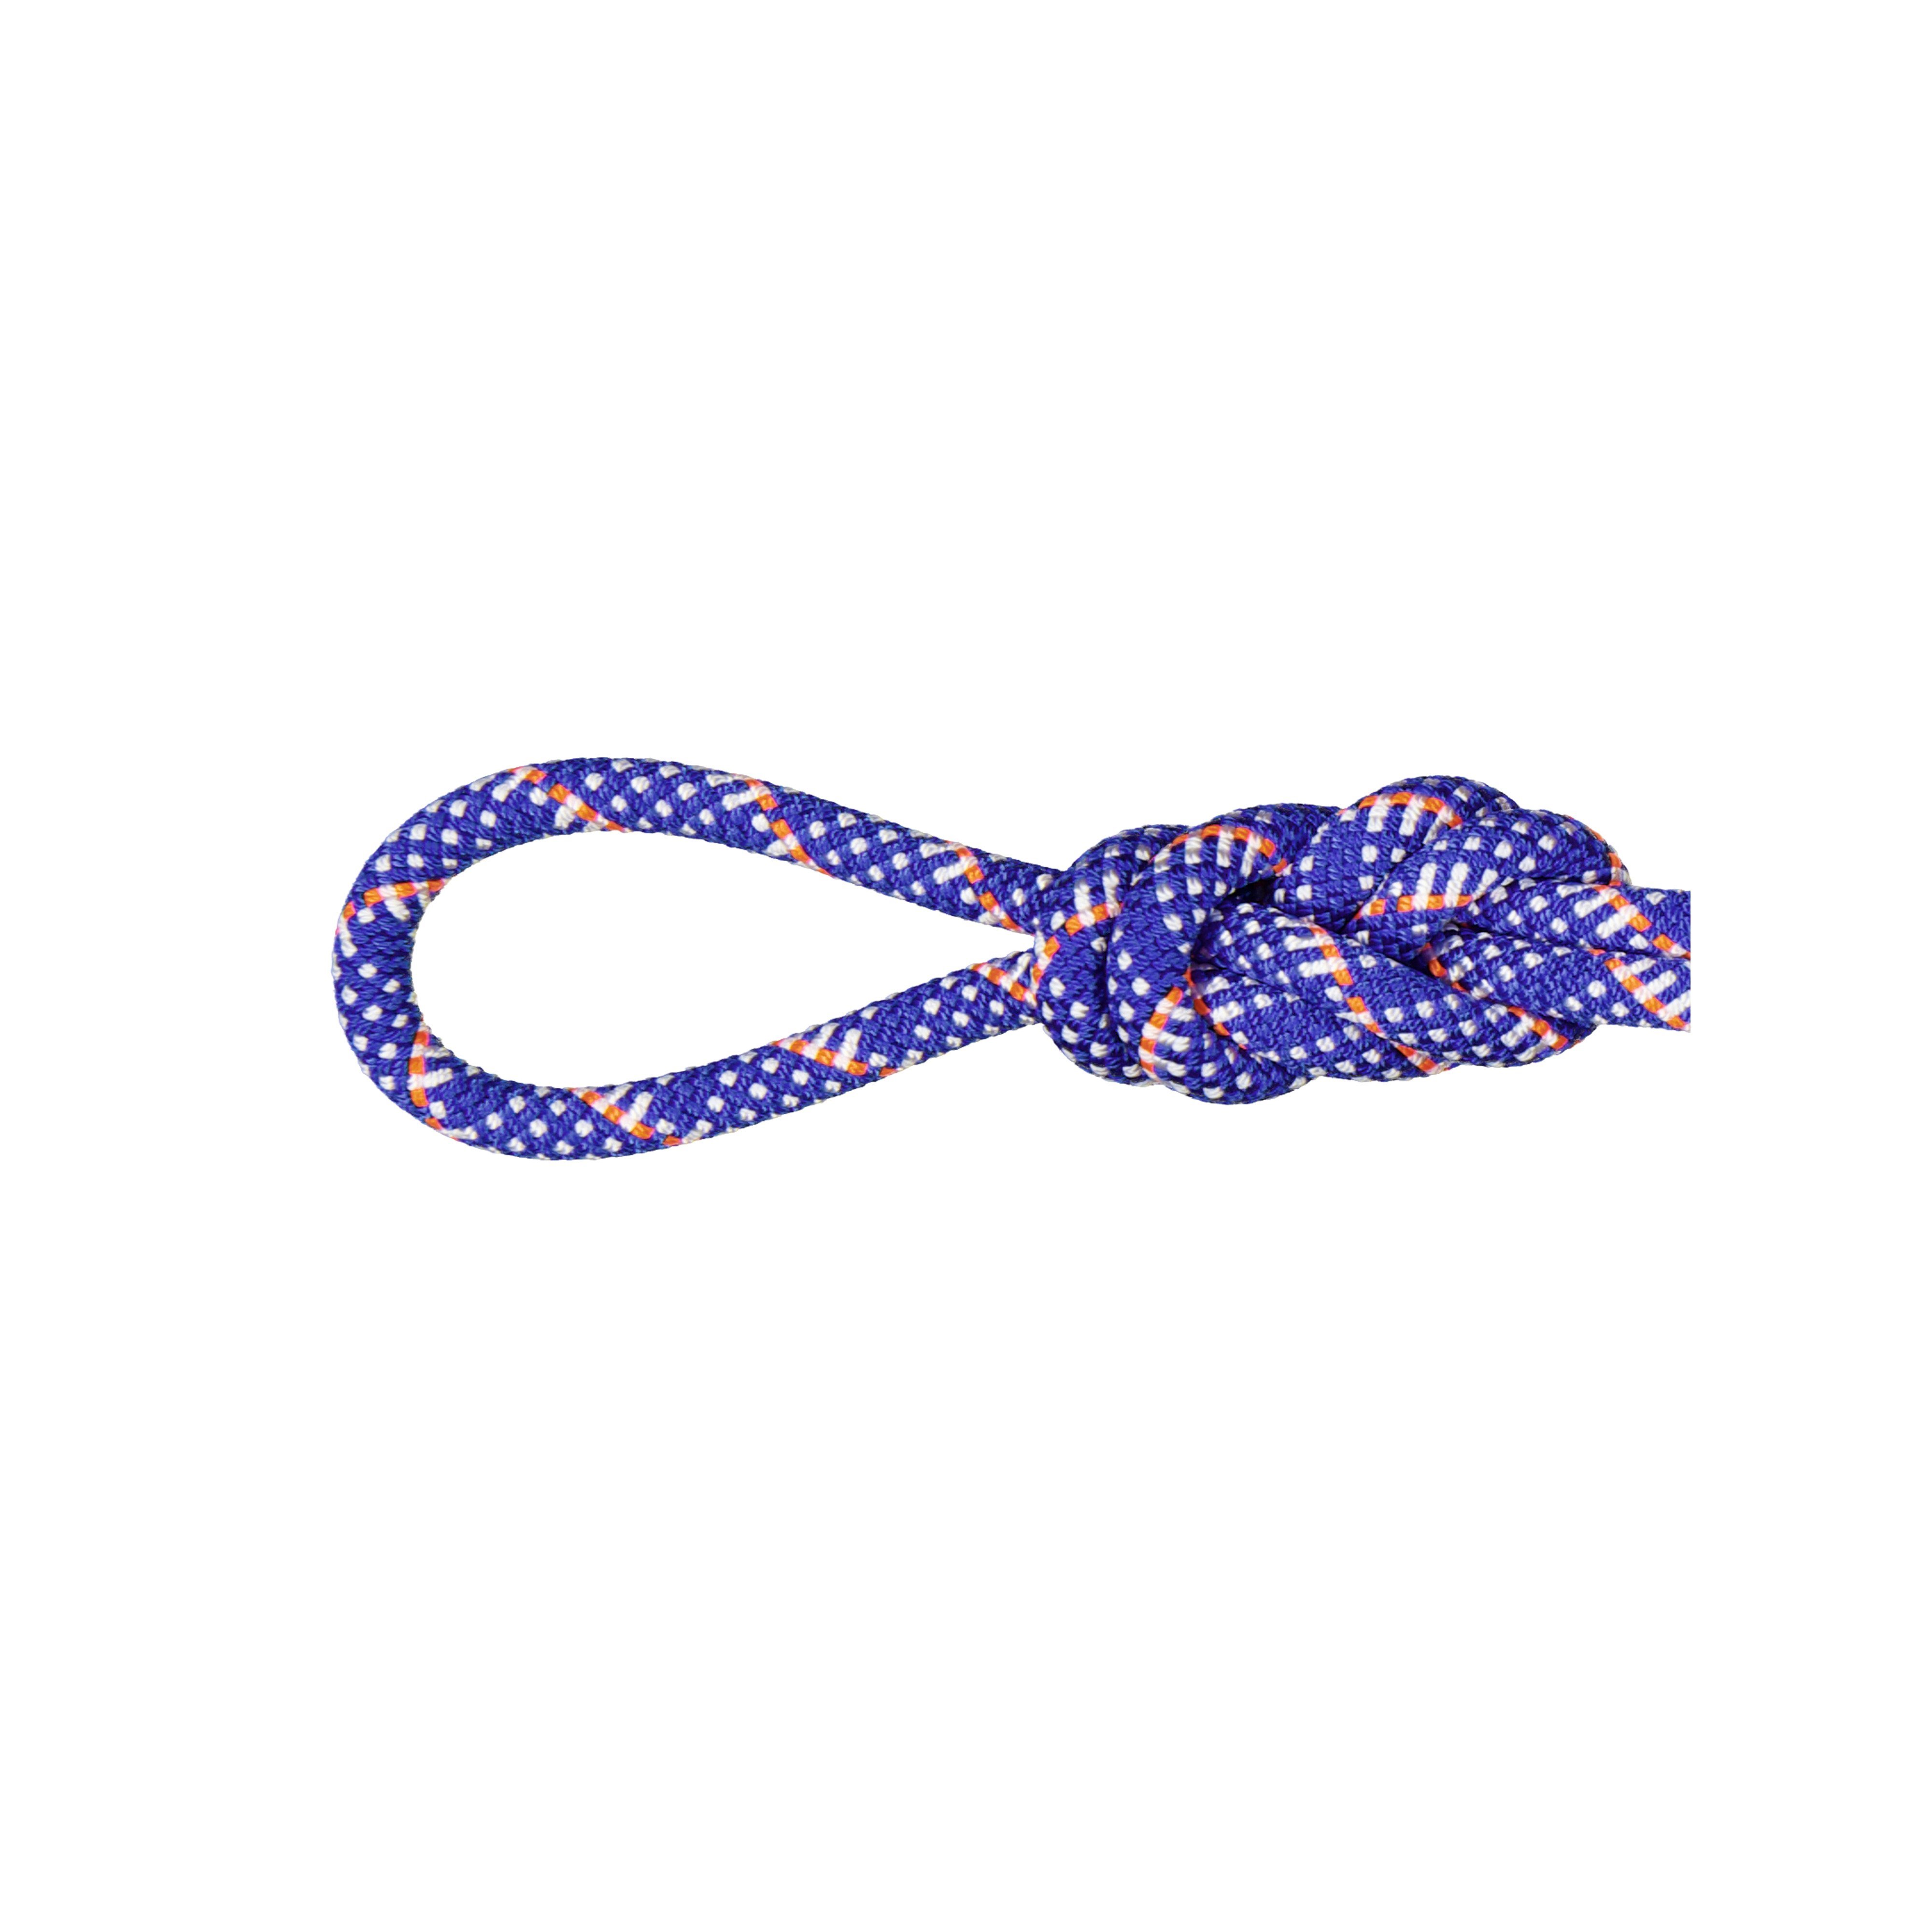 10.1 Gym Station Classic Rope - Classic Standard, blue-white, 150 m product image